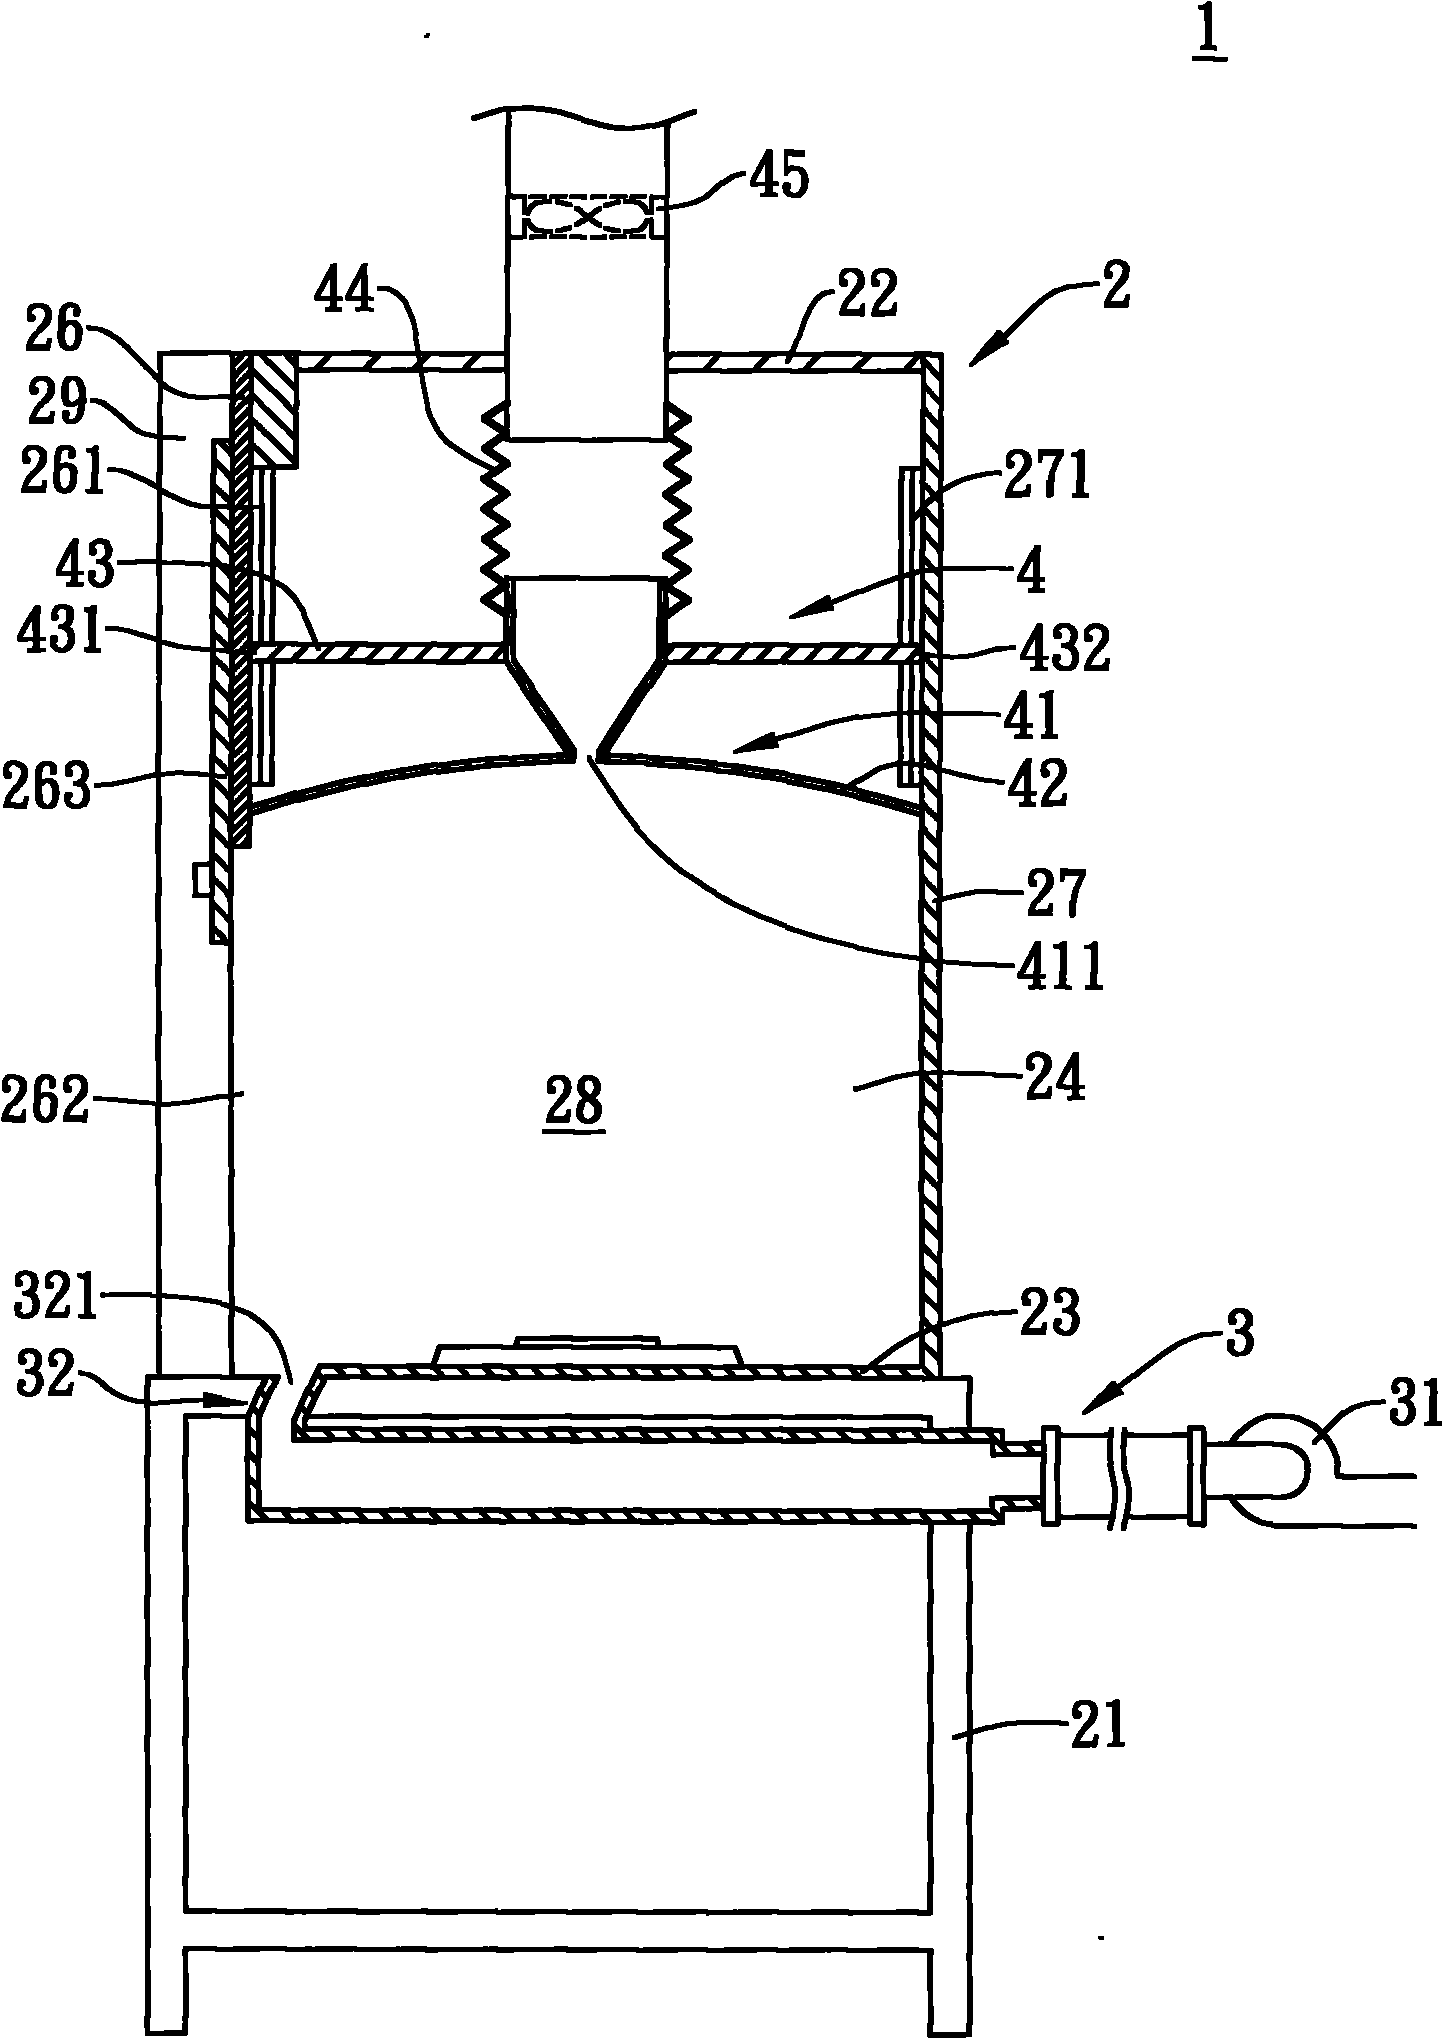 Reverse inclined air curtain type air exhaust cabinet